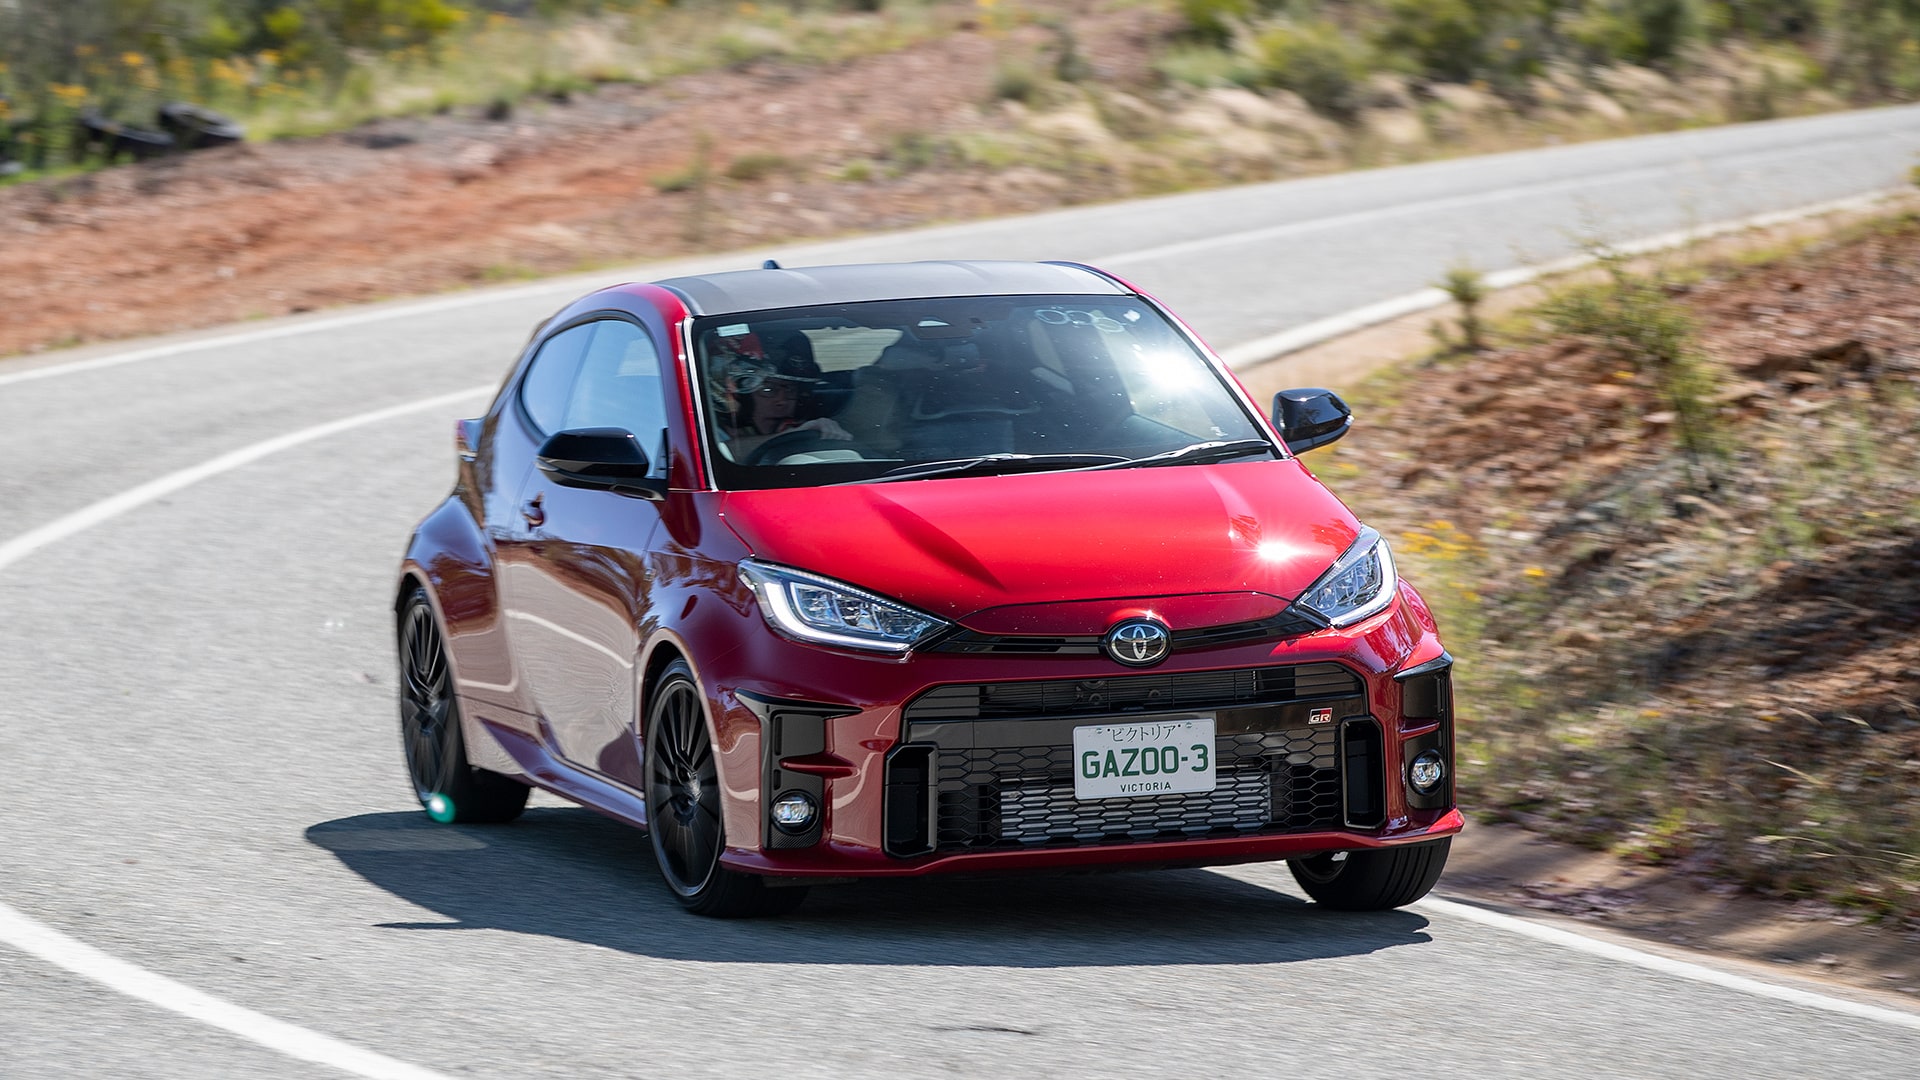 GR Yaris Update: Performance Car Continues to Ignite the Market | Latest News